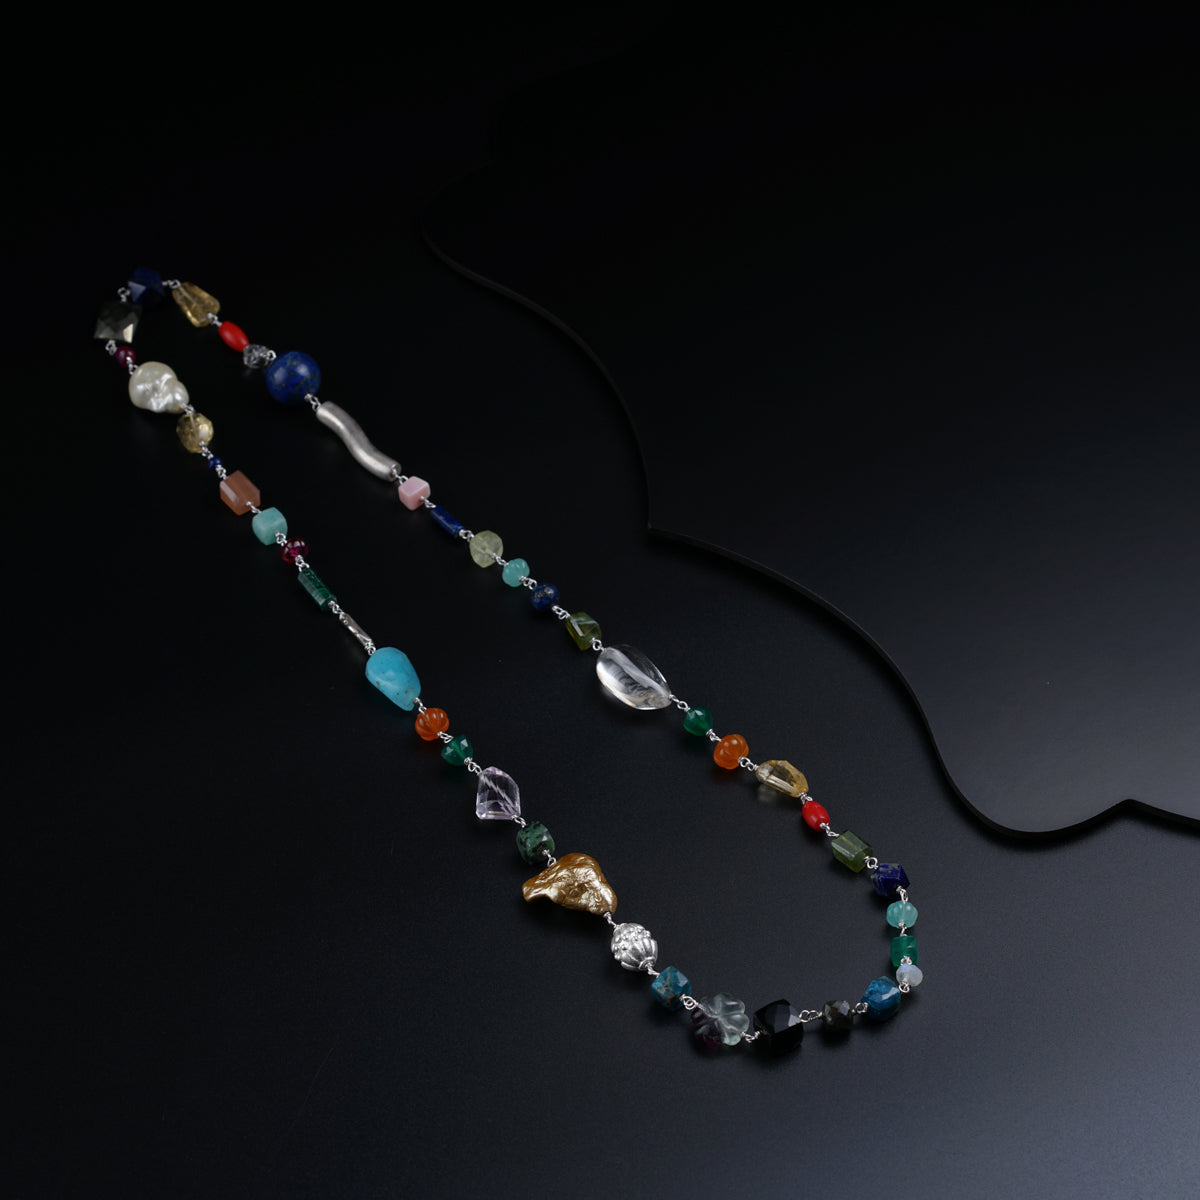 a beaded necklace with various colored beads